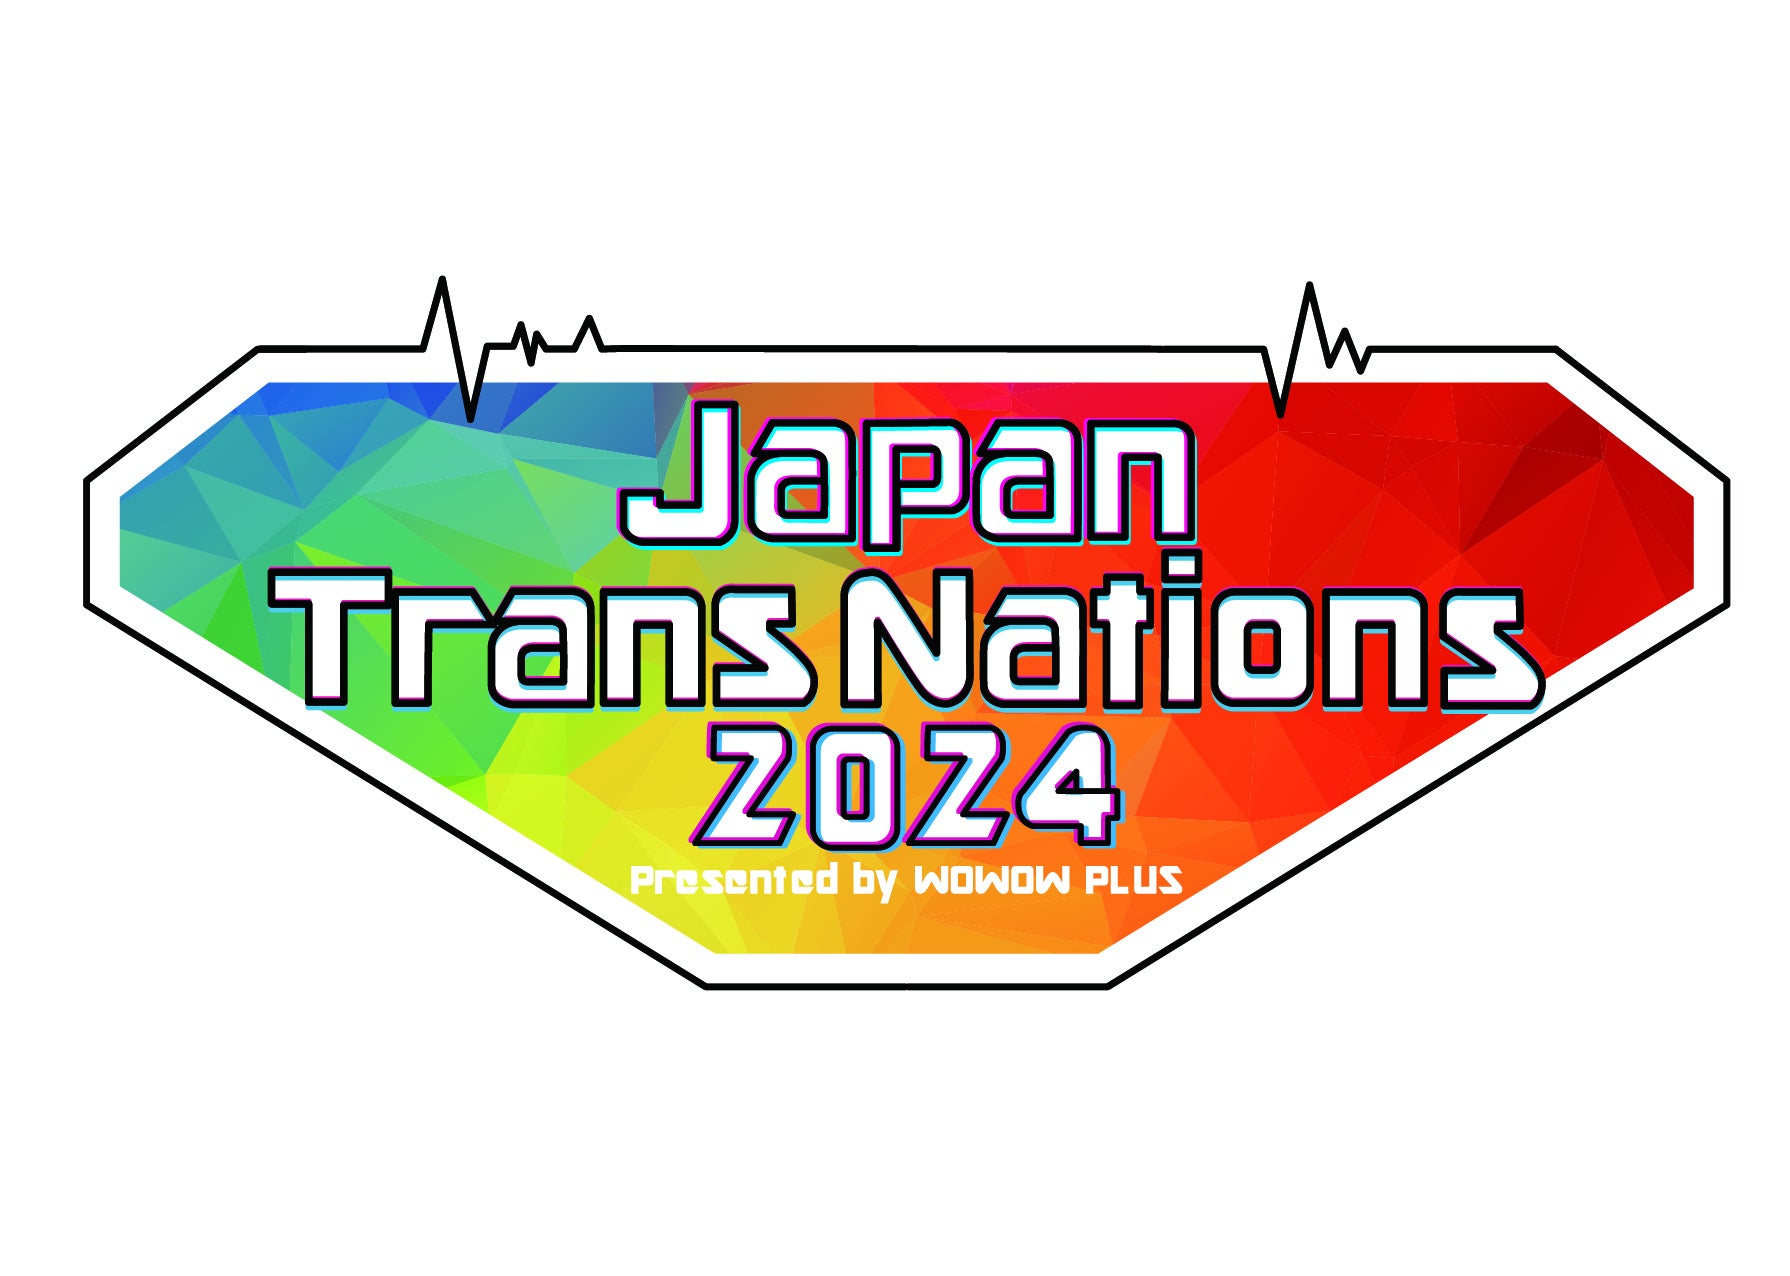 『Japan Trans Nations 2024 Presented by WOWOW PLUS』第2弾 出演アーティスト発表！